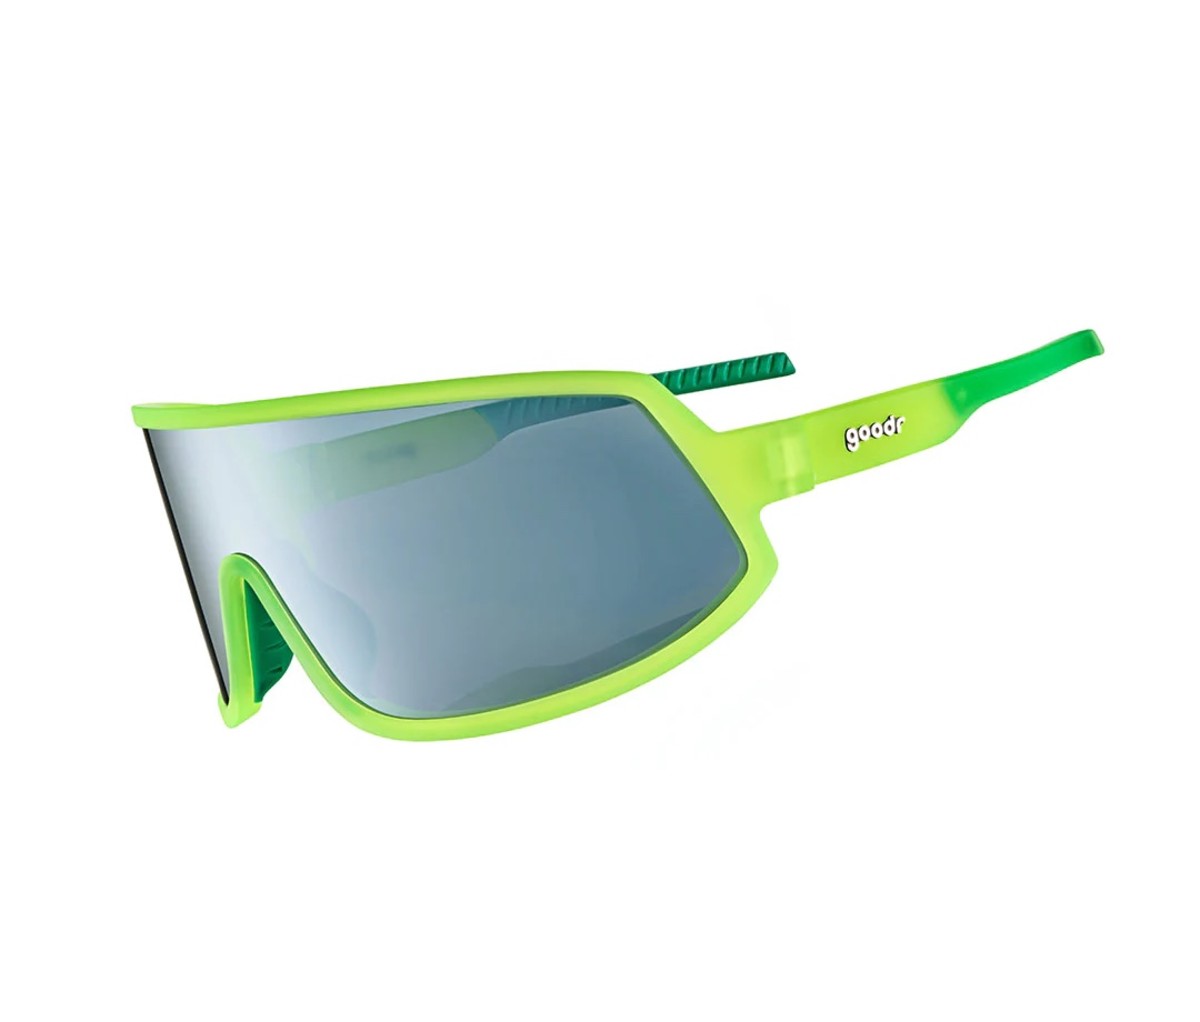 Green goodness is supplied with Goodr's Nuclear Gnar sunglasses.